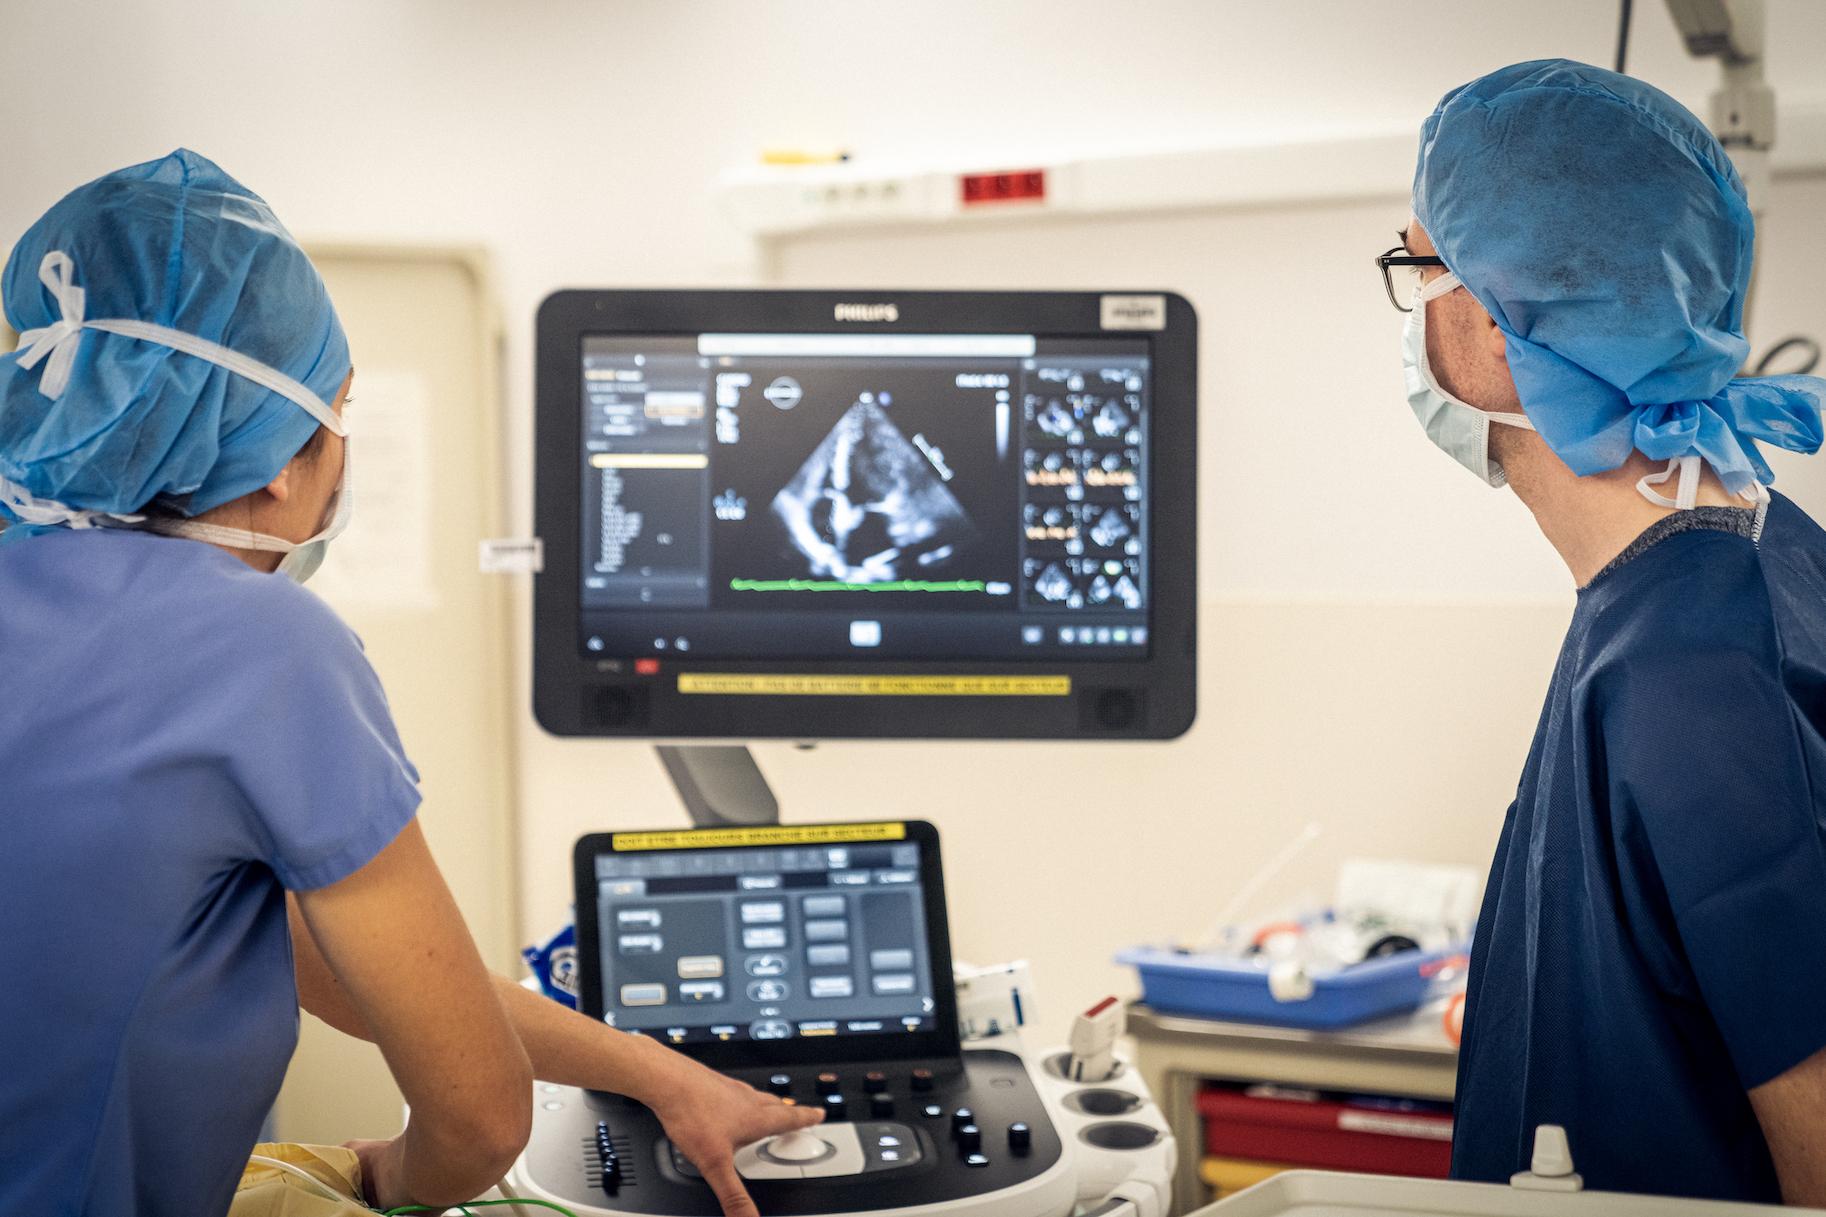 Digital heart twin: the virtual double that is revolutionizing patient ...